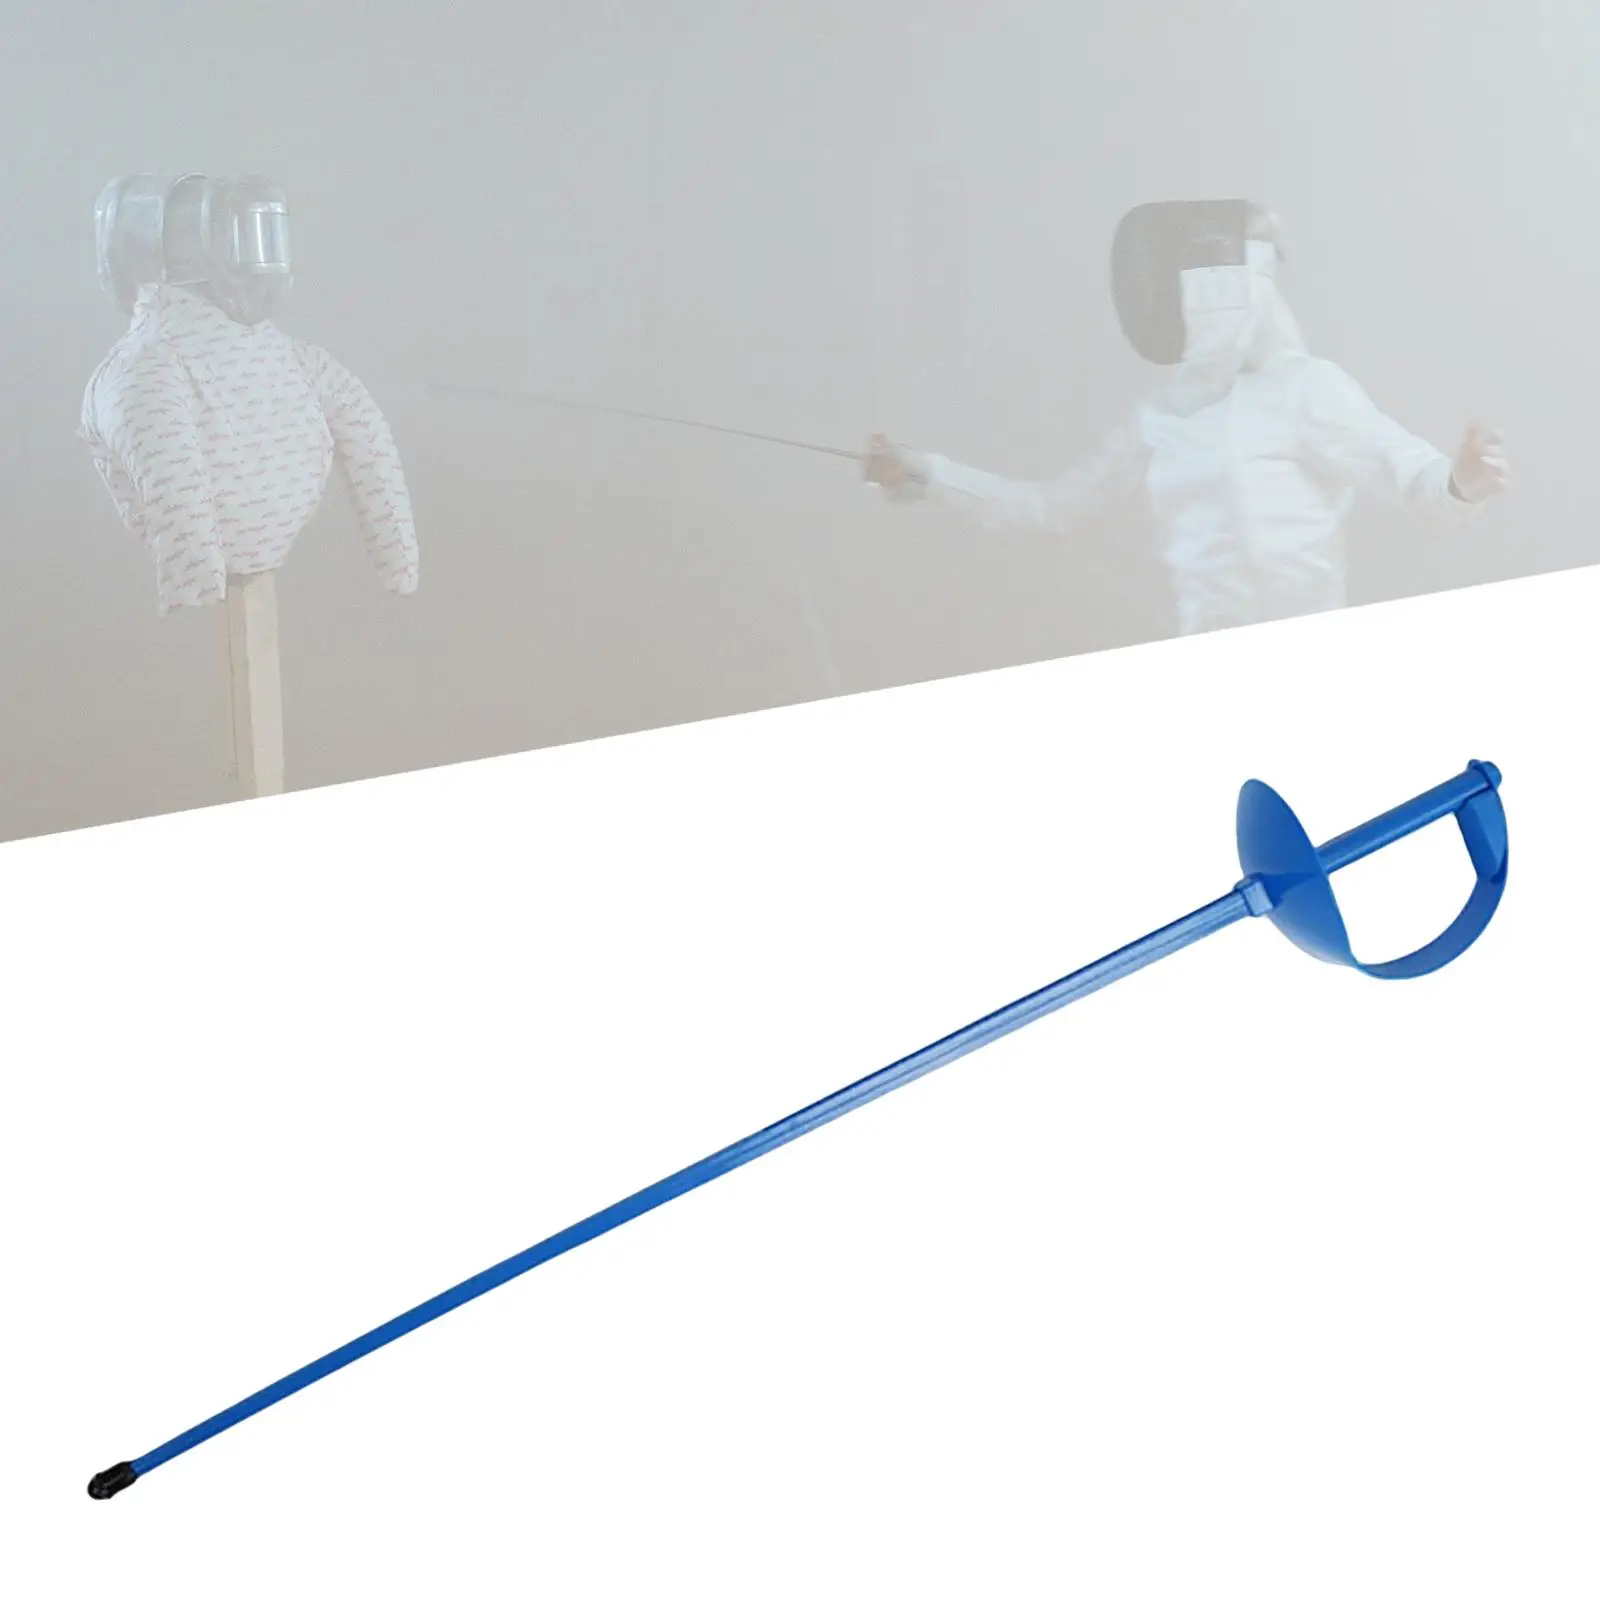 Children`s Fencing Saber SparTraining Aid Halloween Presents Teaching Coaches Training Stick Practices Fencing